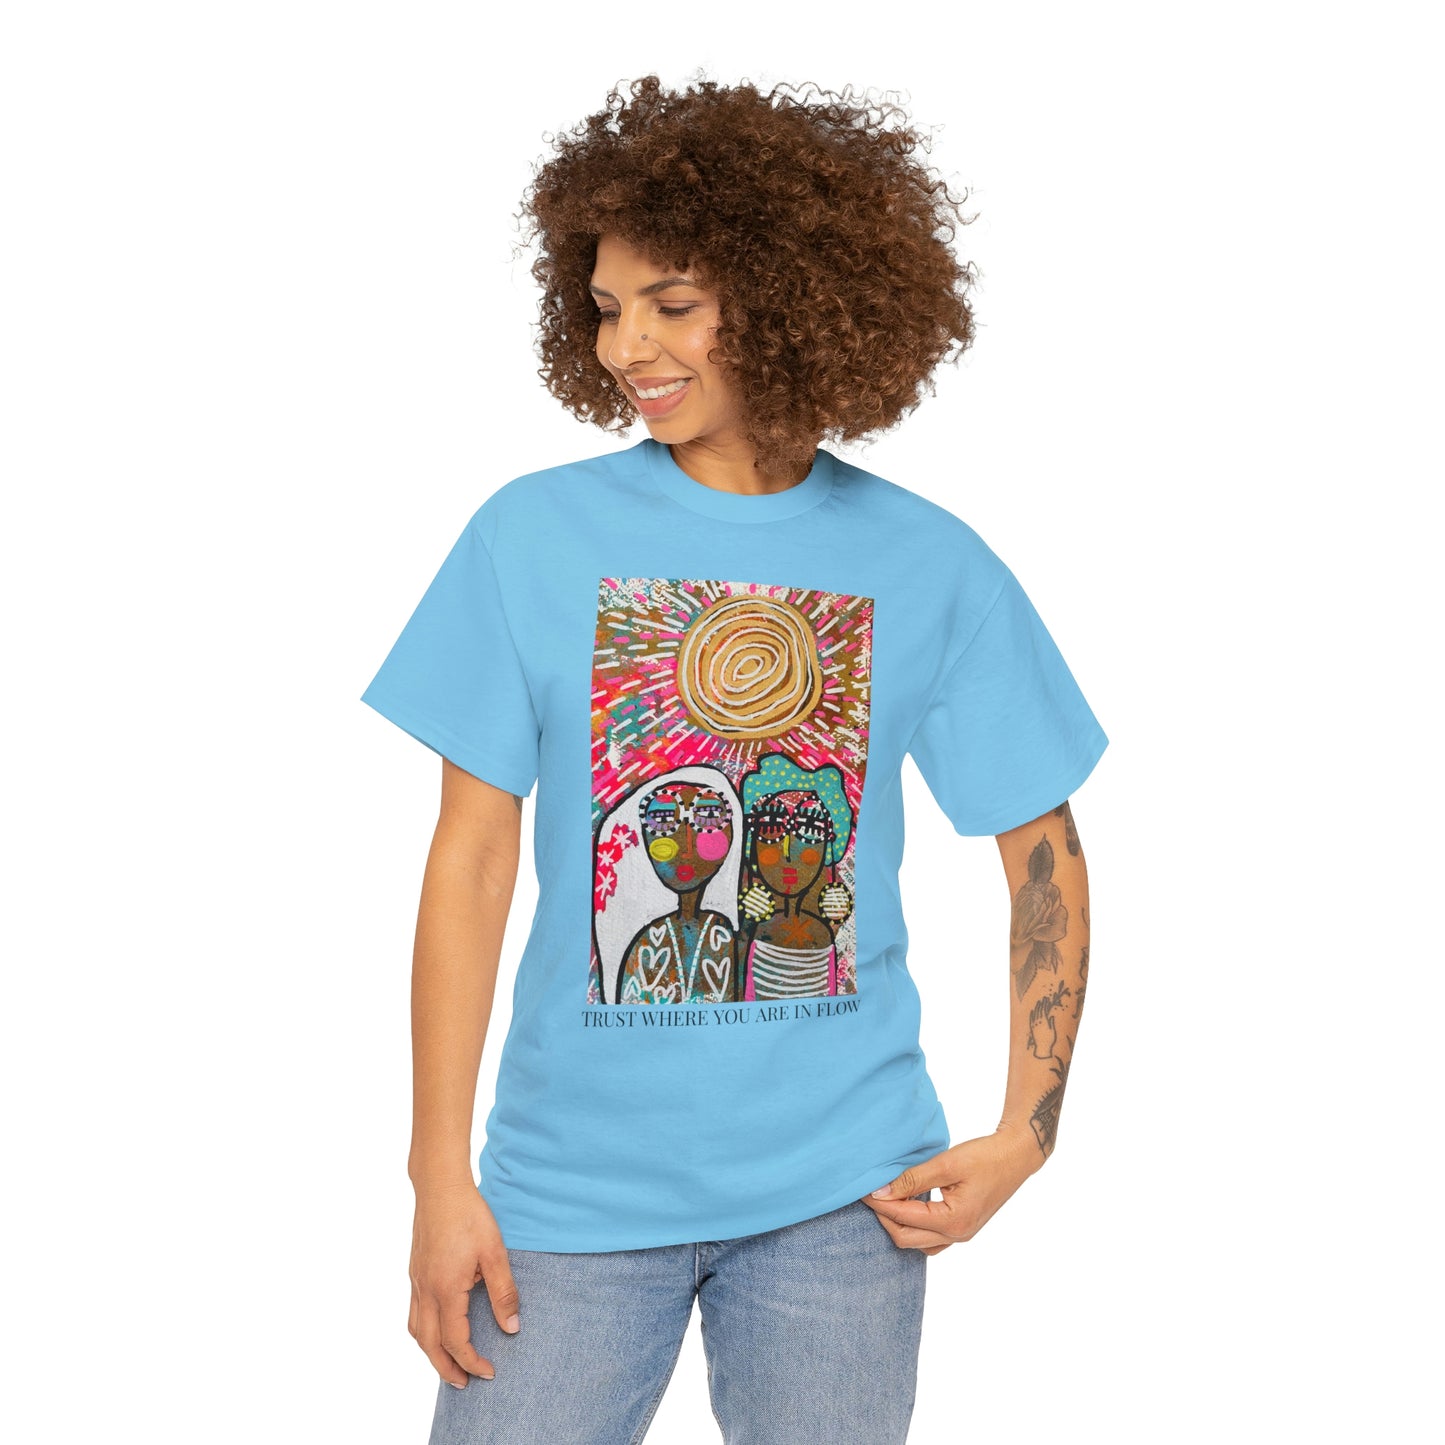 "TRUST WHERE YOU ARE IN FLOW" Unisex Heavy Cotton Tee